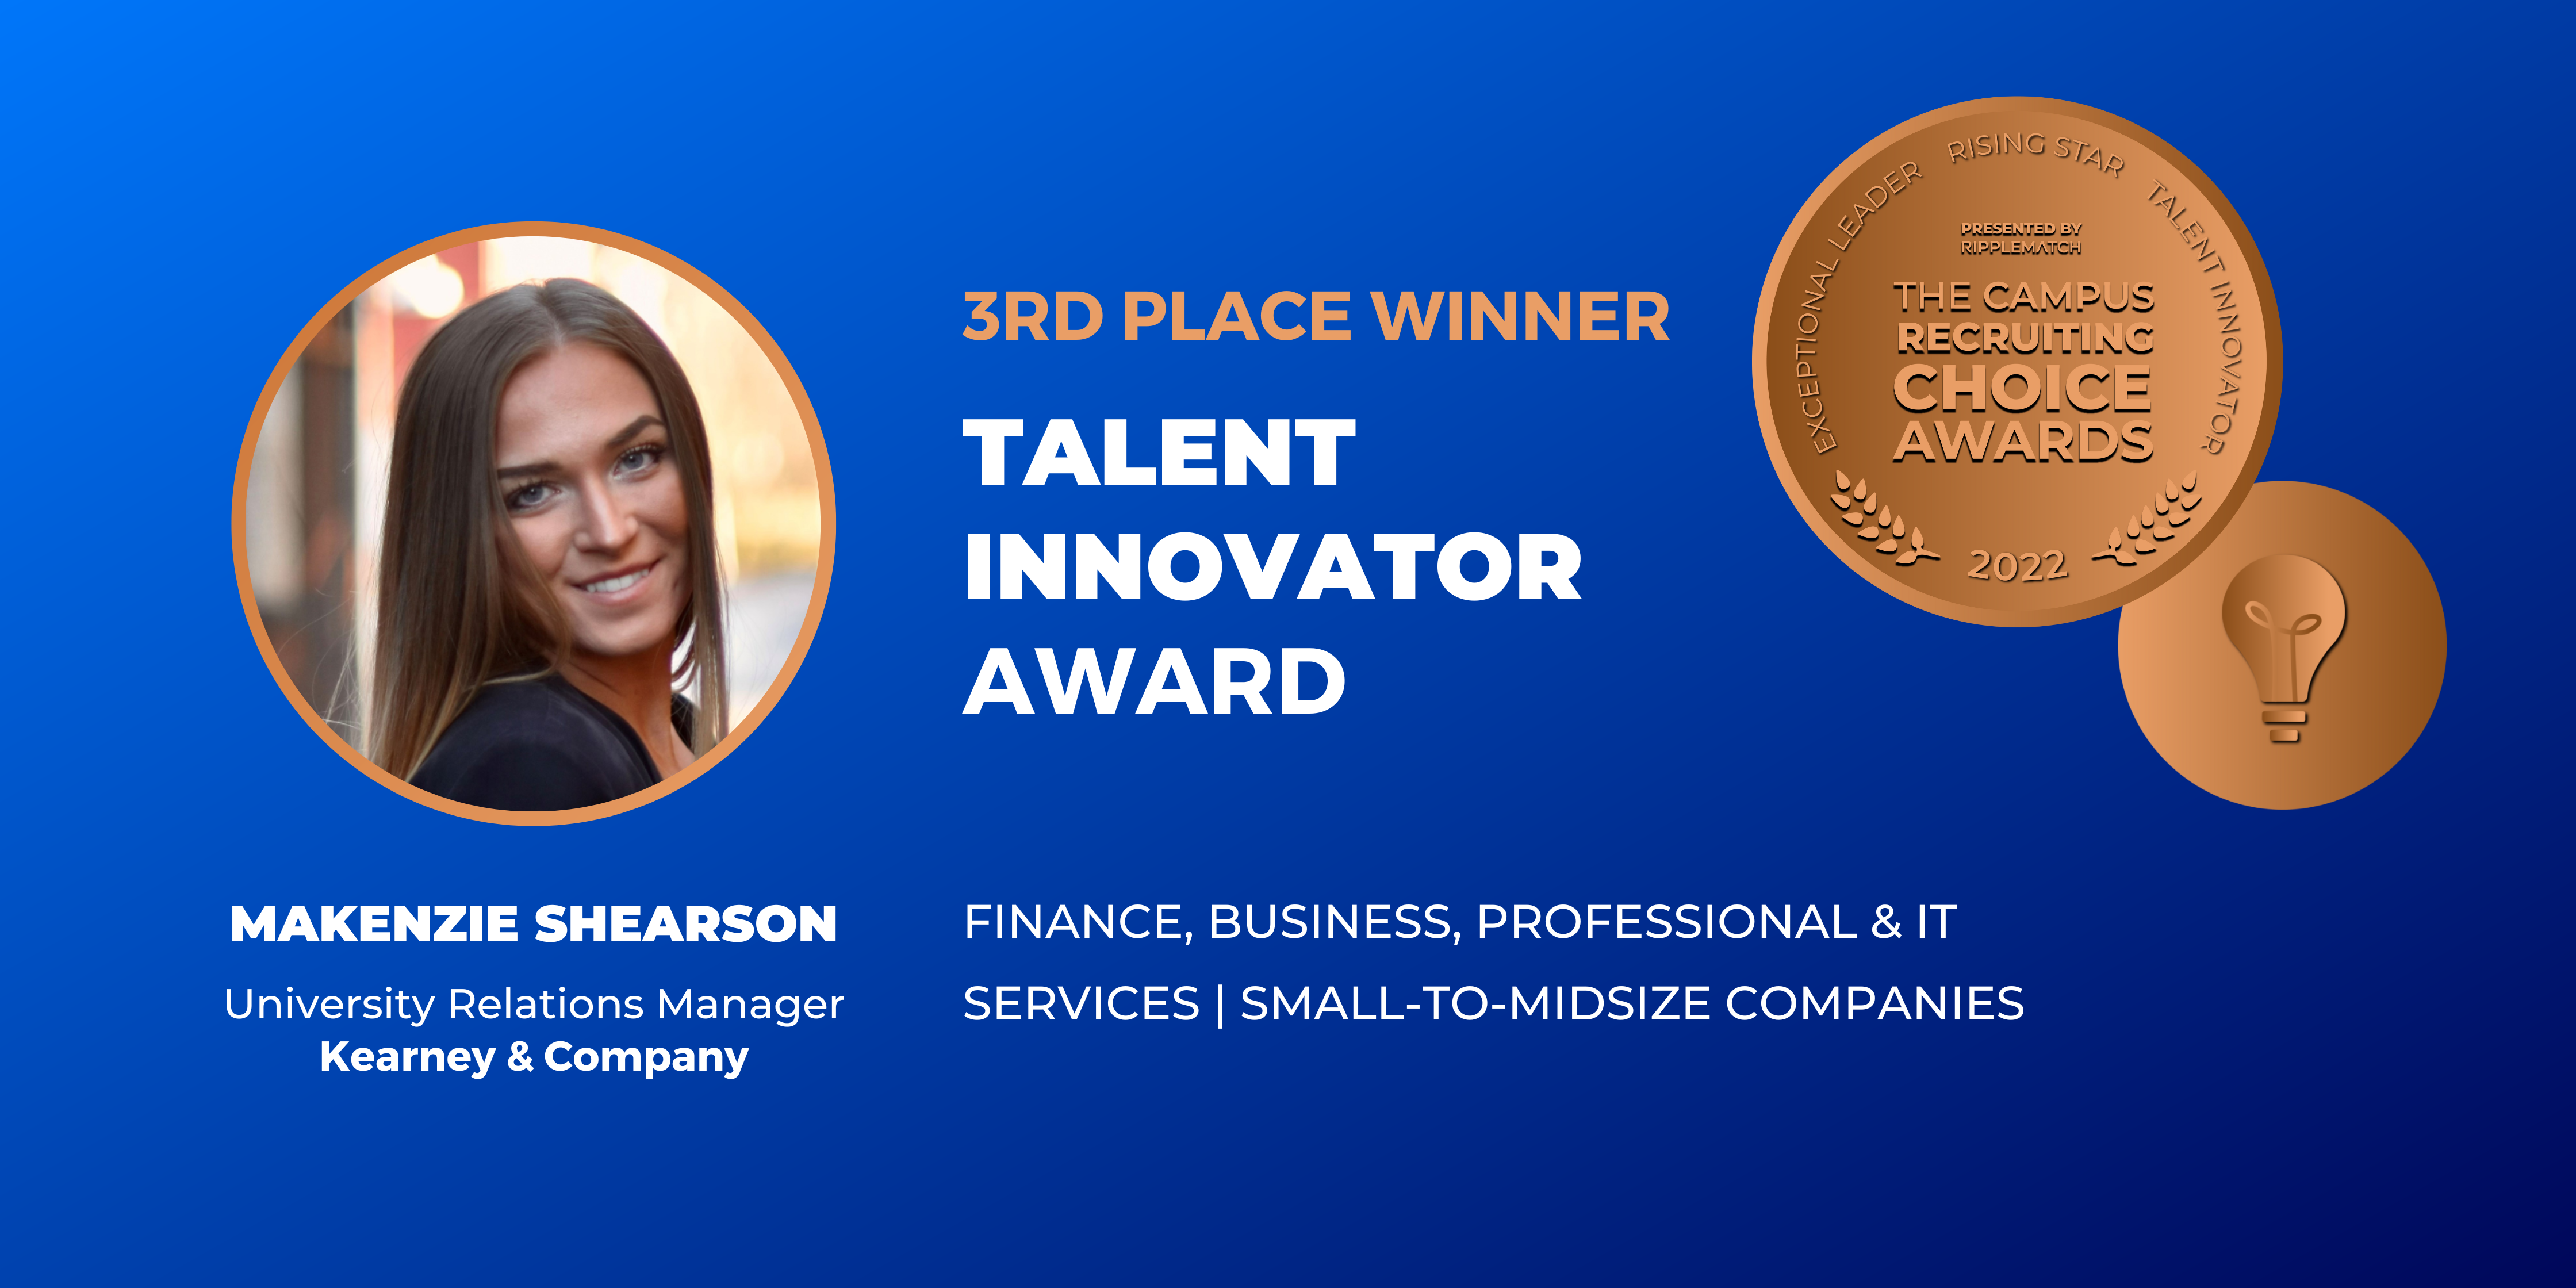 TALENT INNOVATOR - 3rd place - Finance, Business, Professional & IT Services _ Small-to-Midsize Companies - Makenzie Shearson